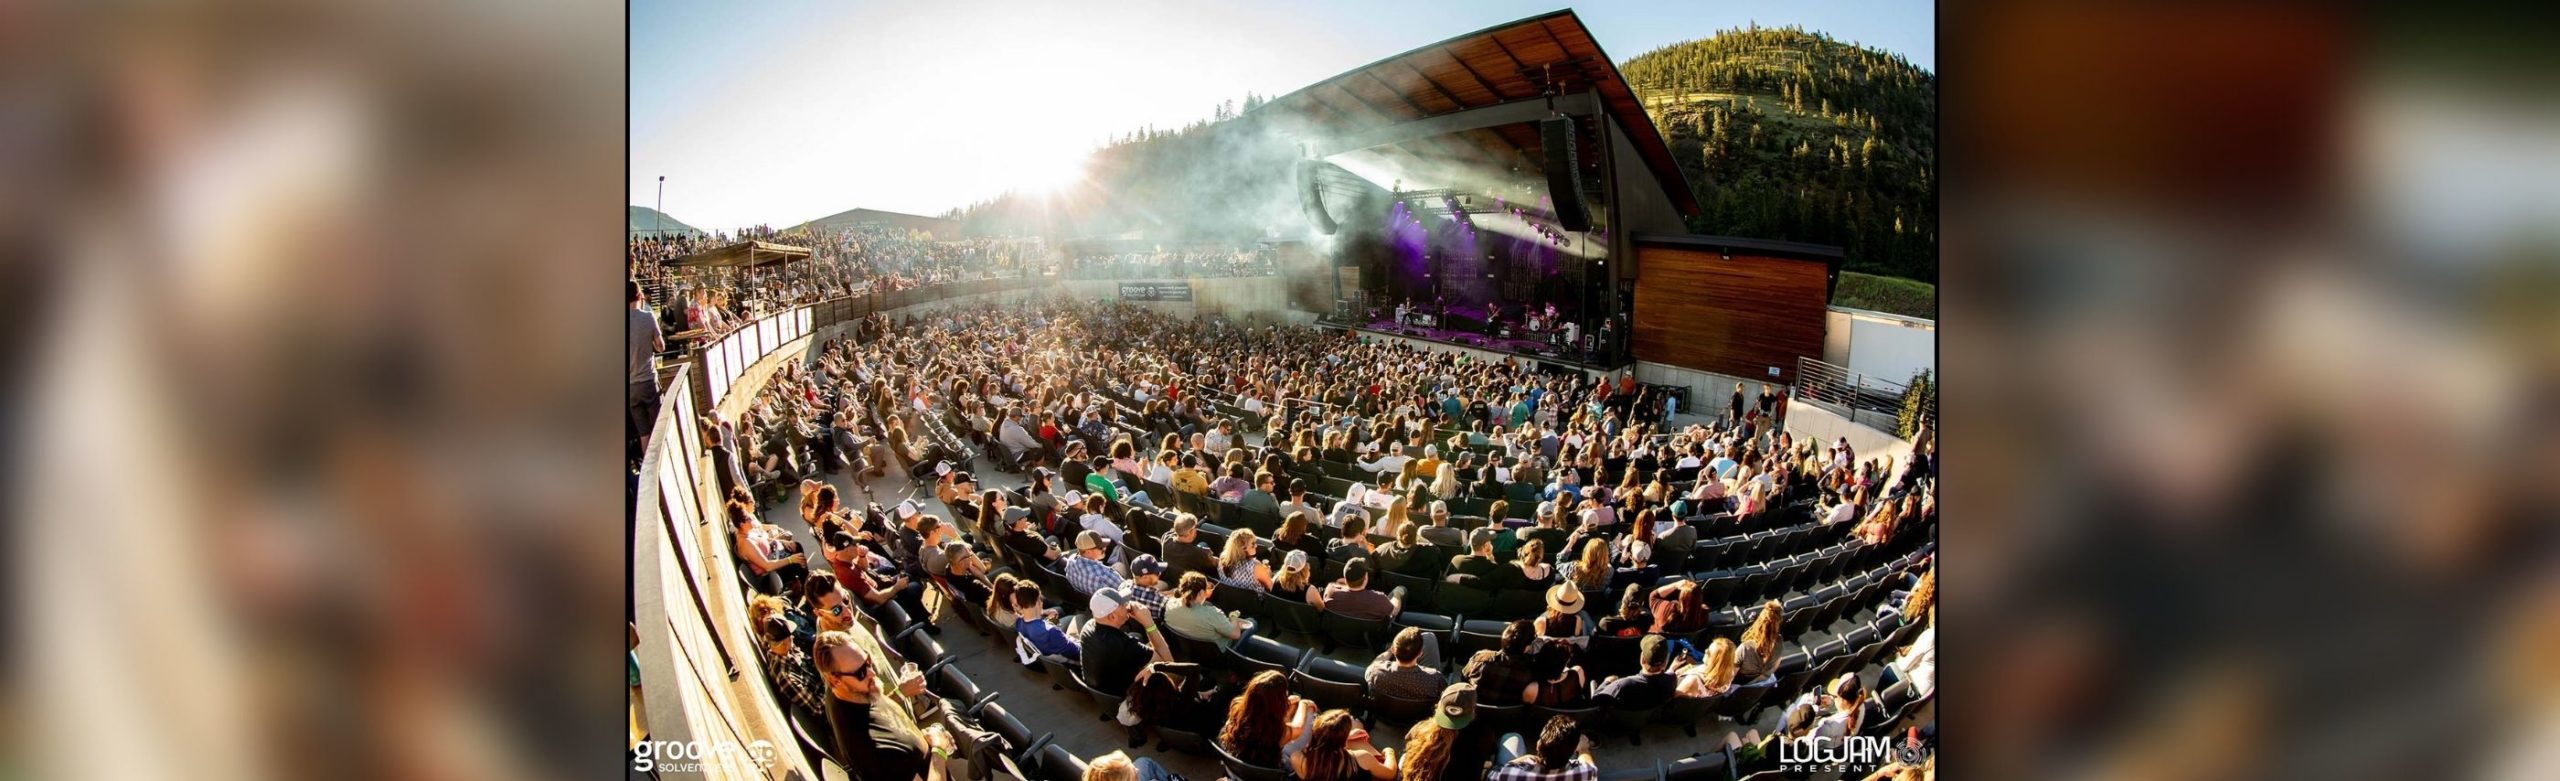 Win a Premium Box to Fleet Foxes at KettleHouse Amphitheater and Support Clark Fork Coalition Image